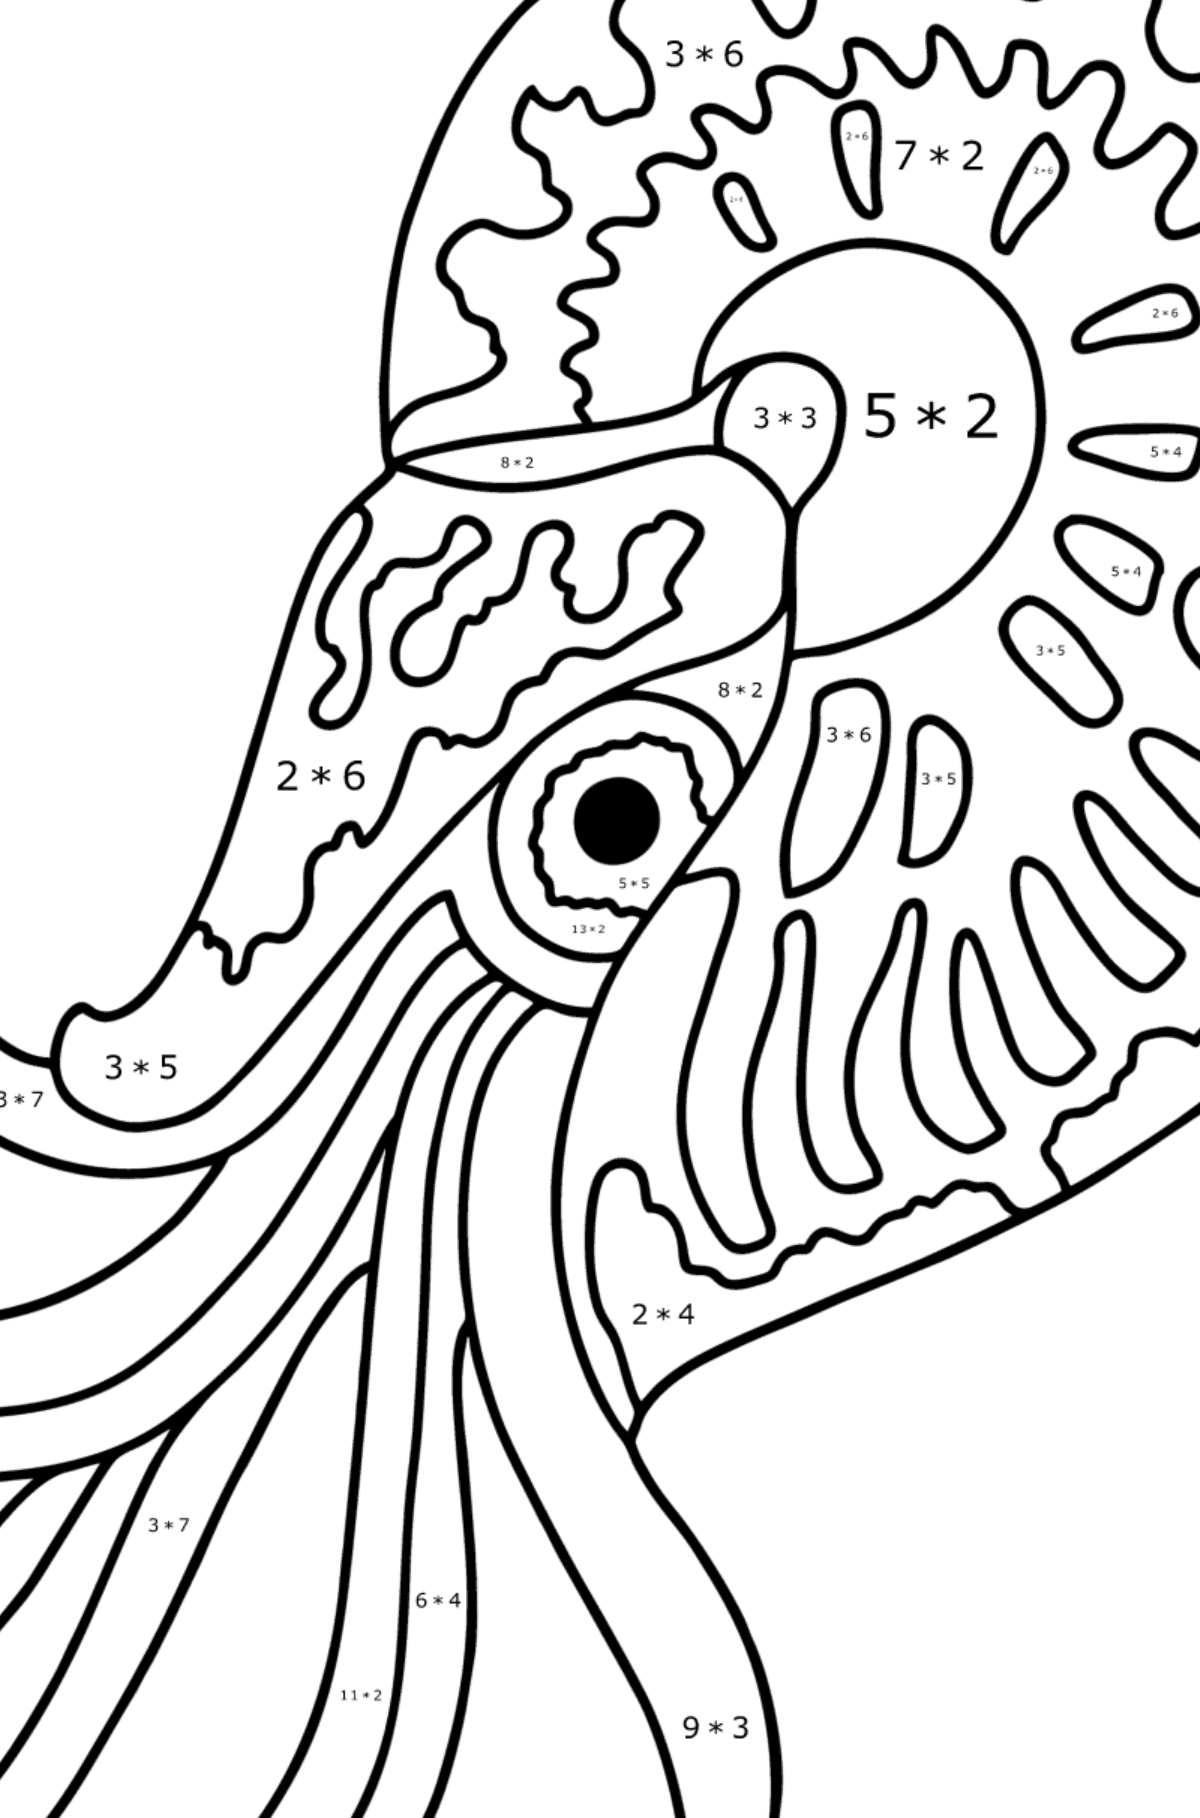 Nautilus coloring page - Math Coloring - Multiplication for Kids